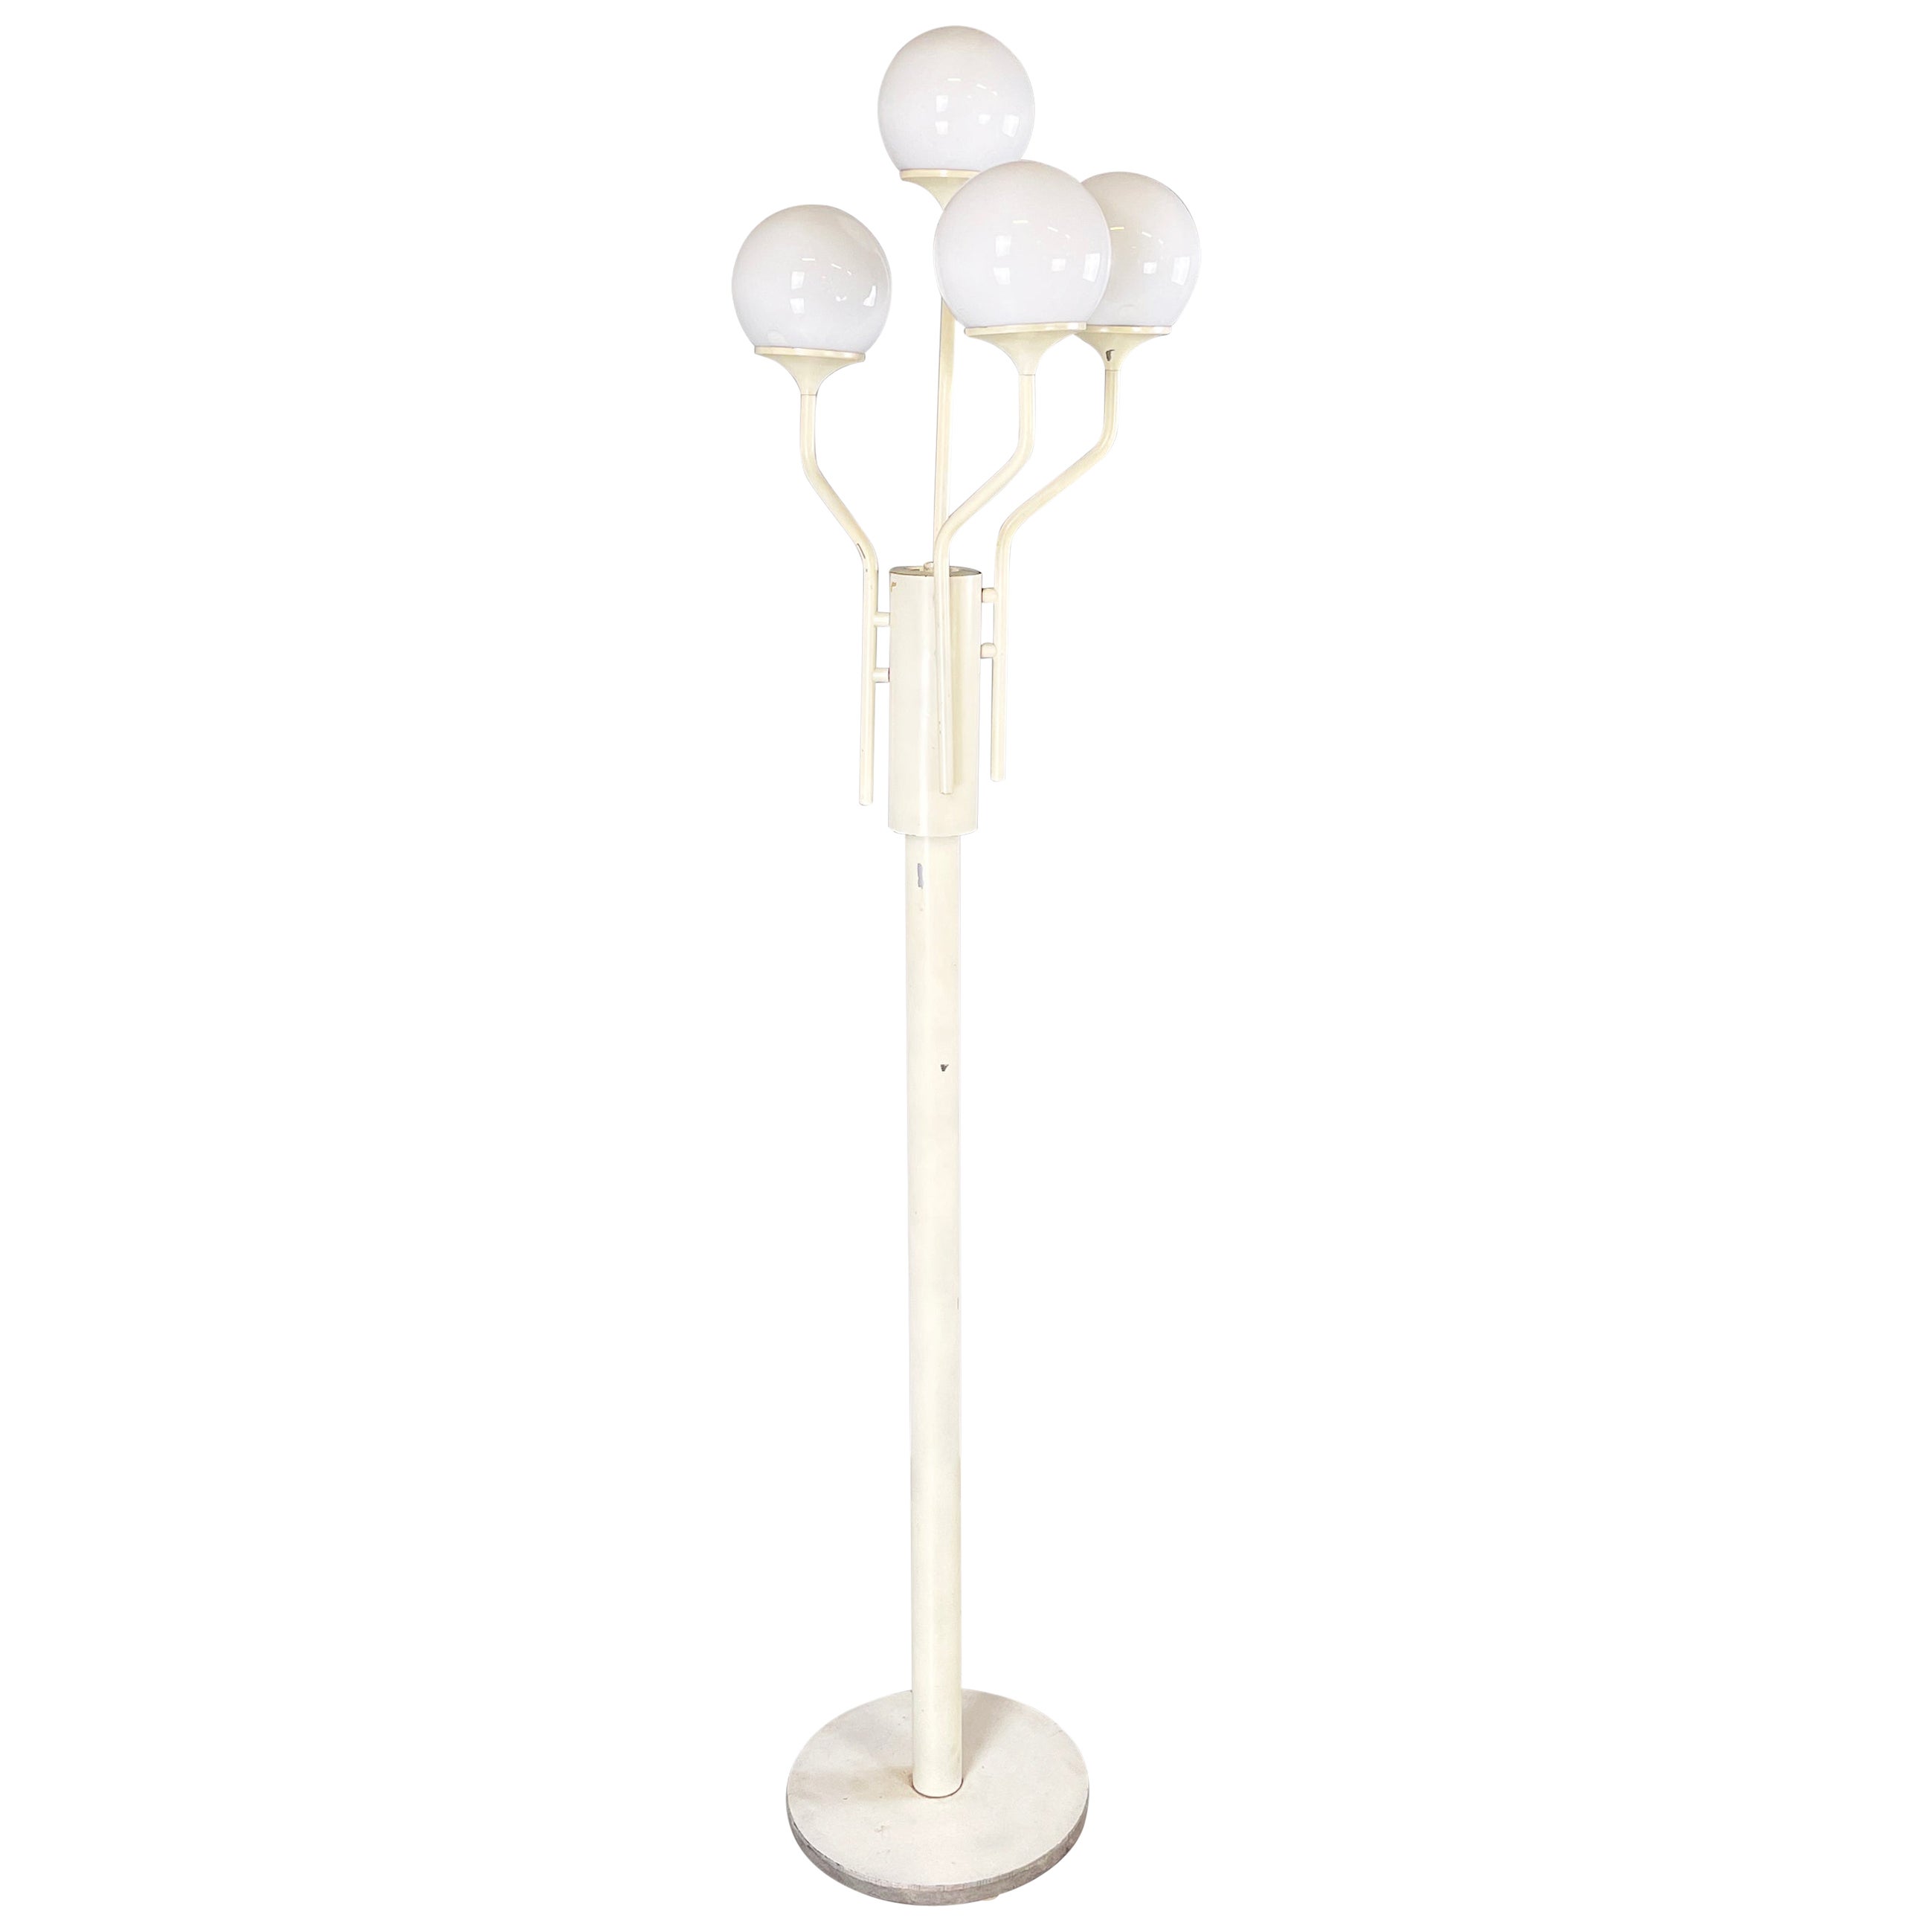 Italian modern floor lamp in opaline glass and white metal, 1980s For Sale